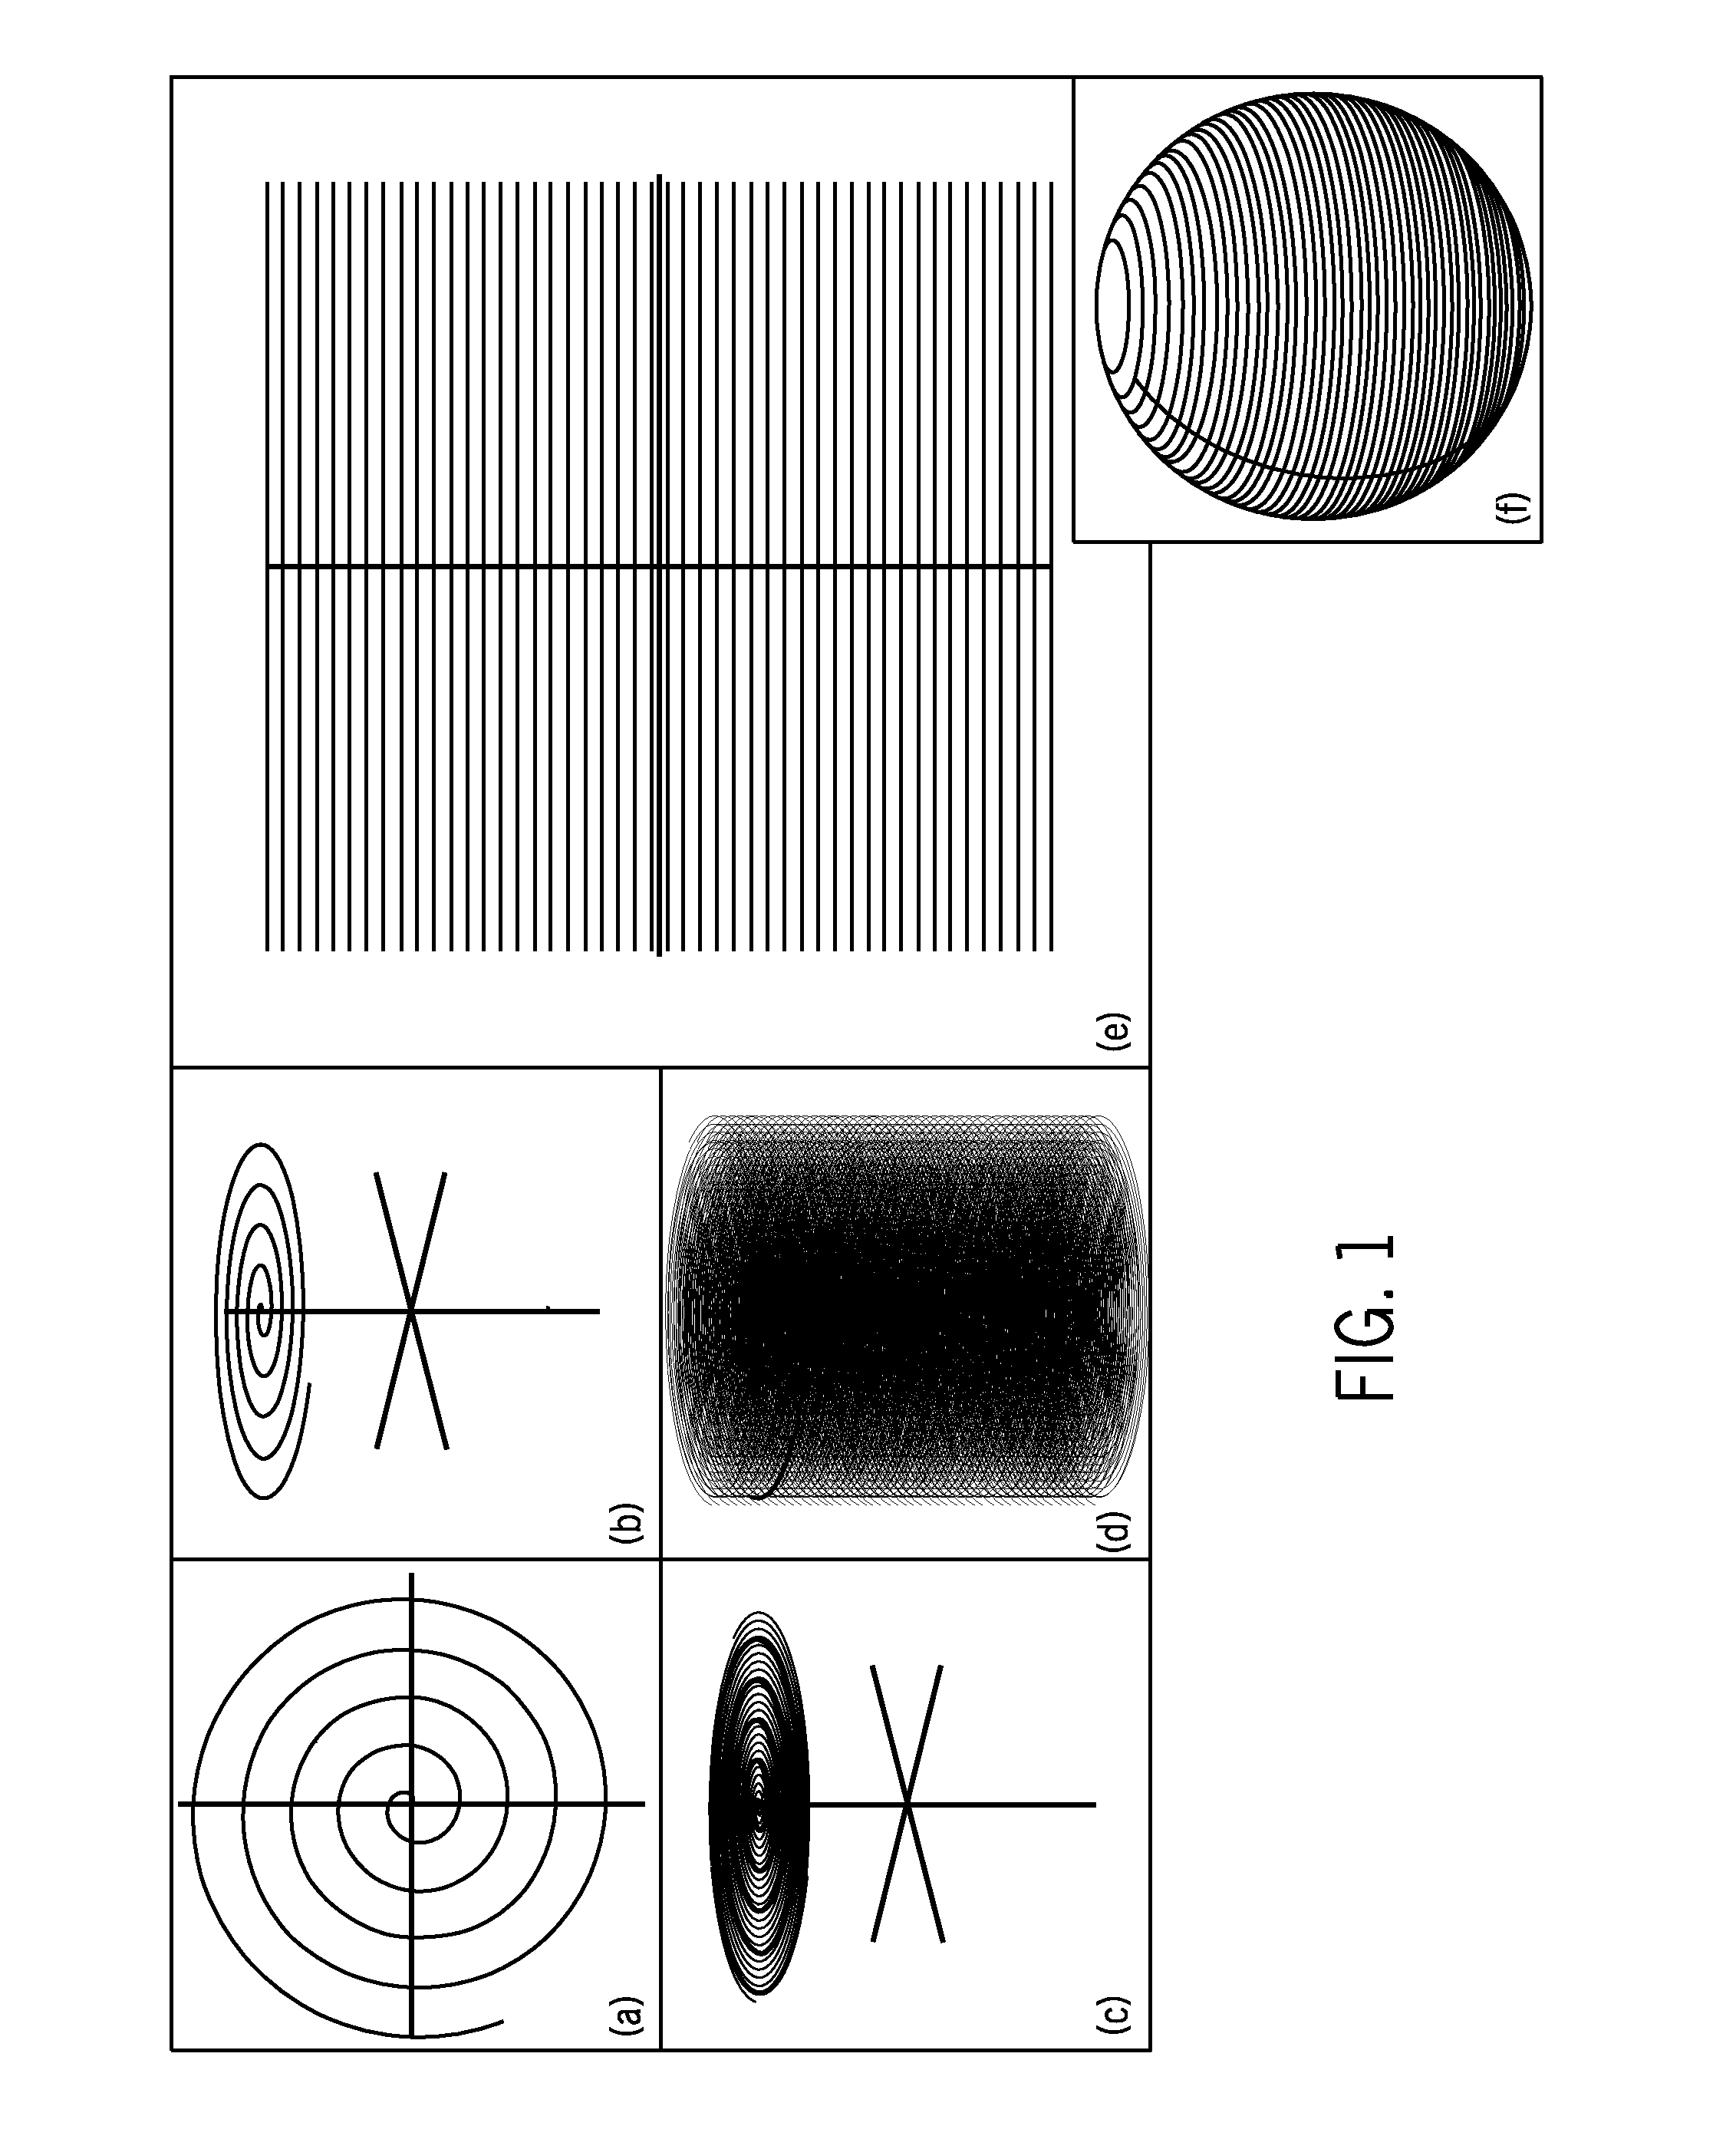 System and Method for Magnetic Resonance Imaging Using Three-Dimensional, Distributed, Non-Cartesian Sampling Trajectories